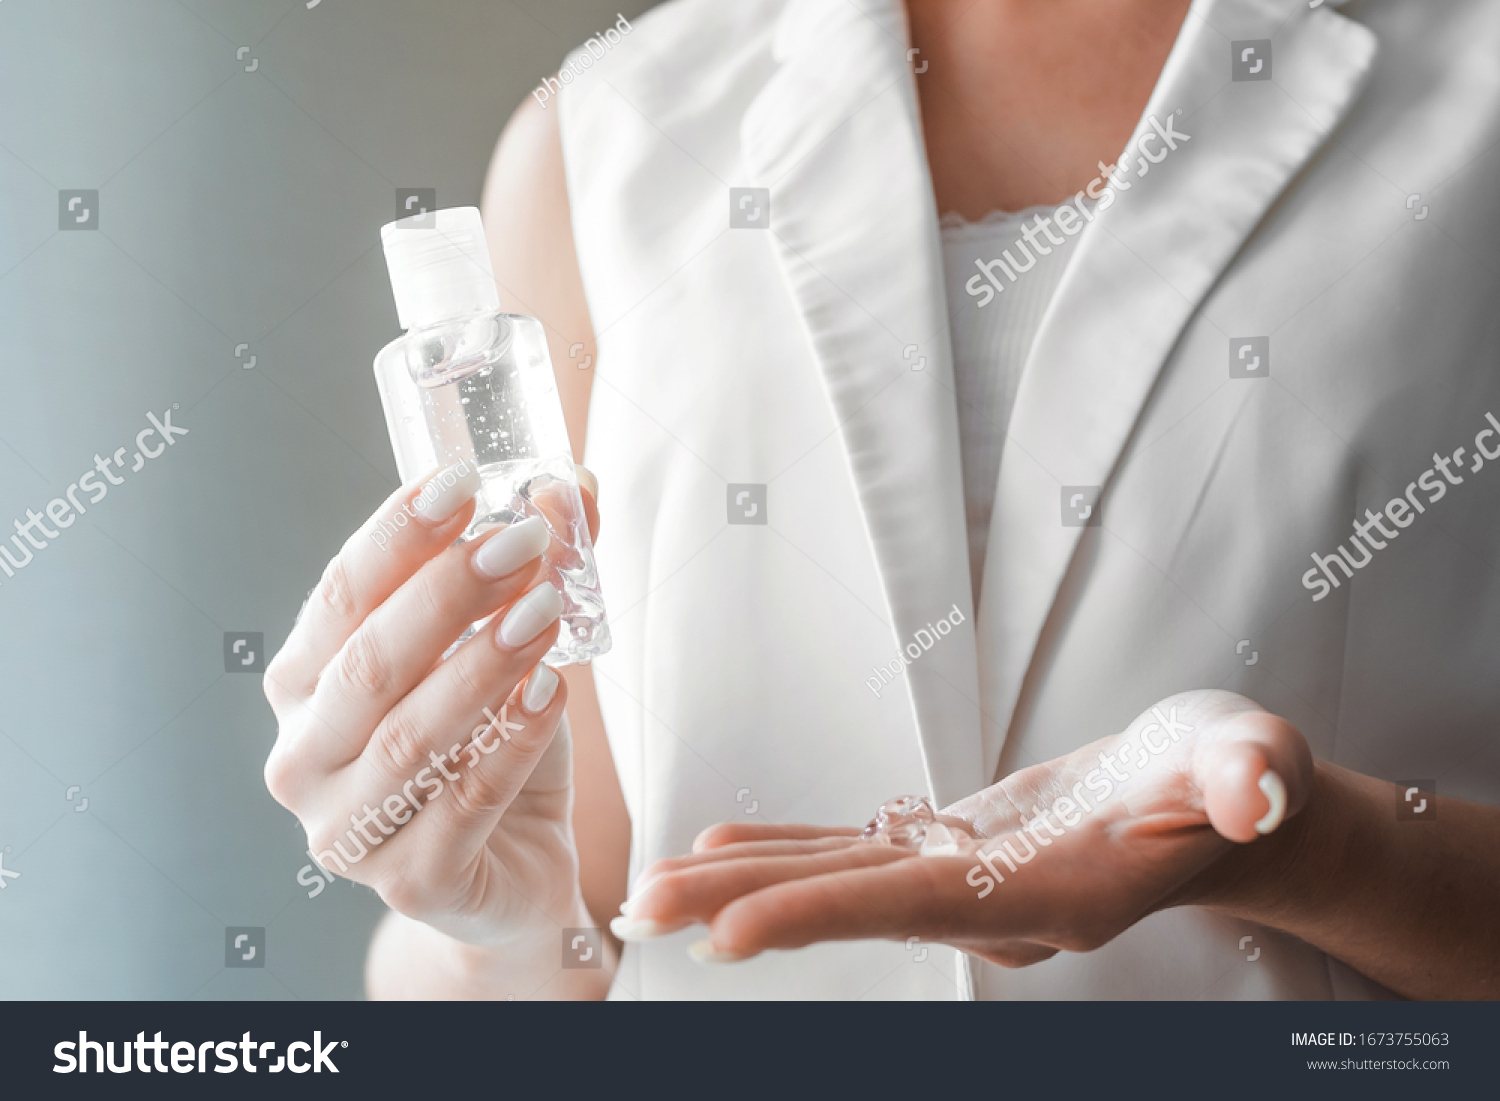 Women washing hands with antibacterial sanitizer gel. Hygiene concept. Prevent the spread of germs and bacteria and avoid infections corona virus. #1673755063